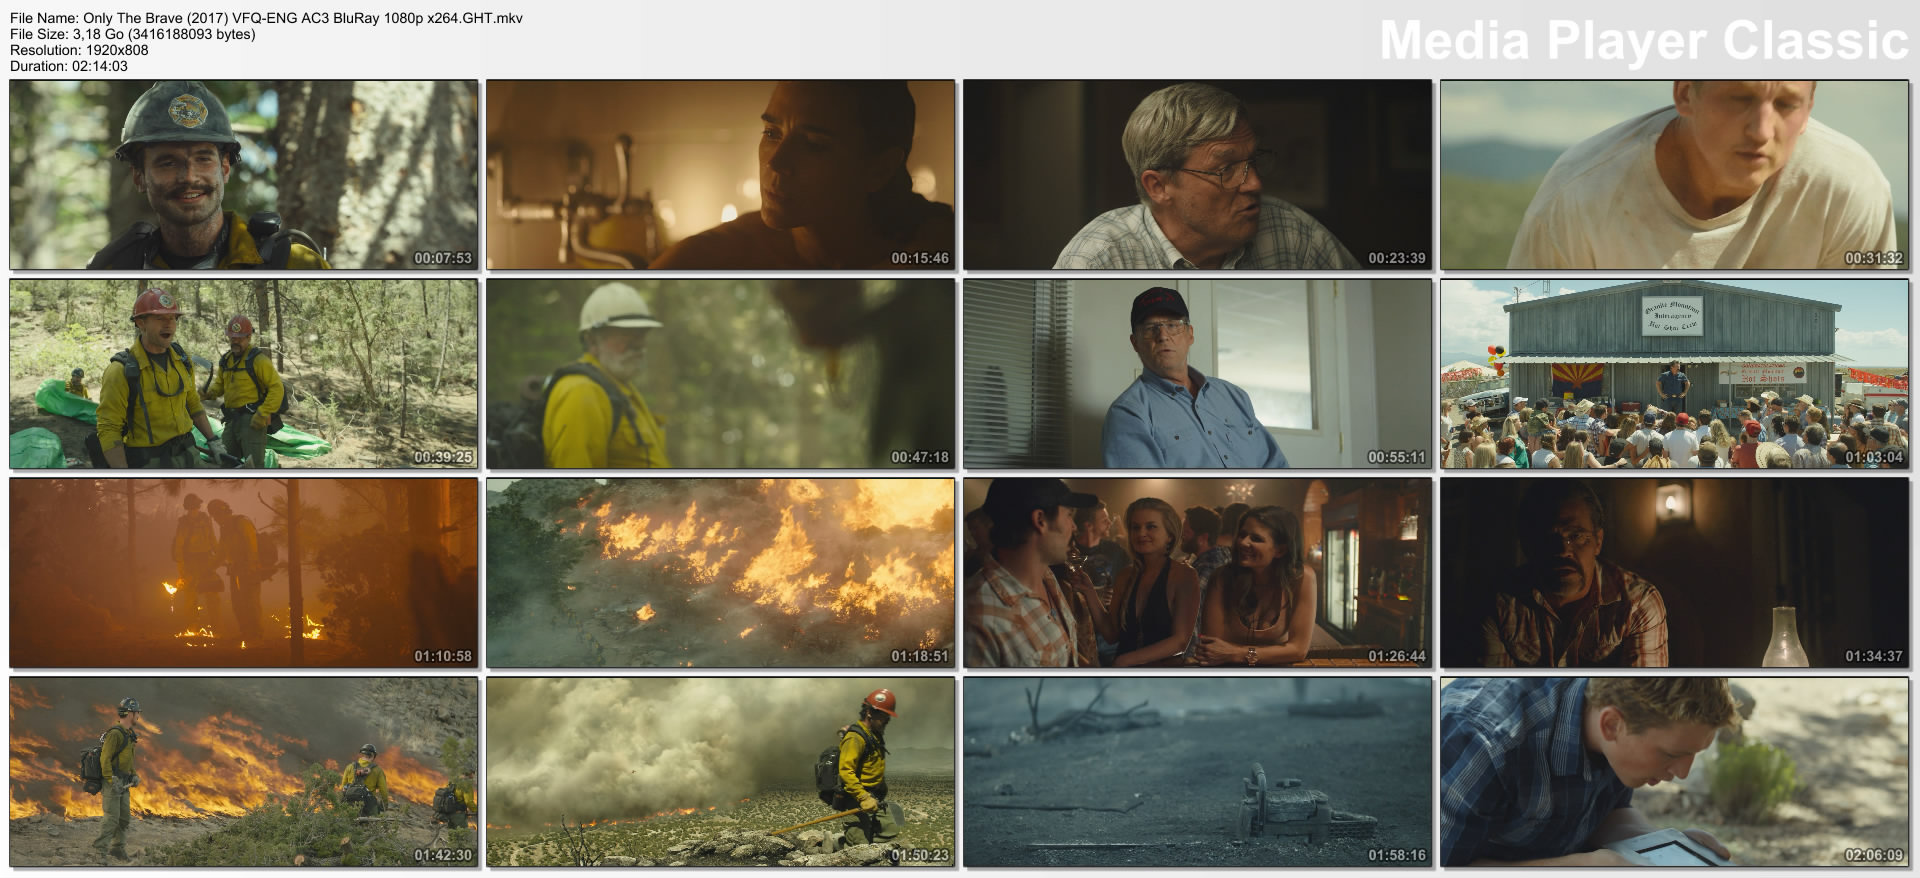 Only The Brave (2017) VFQ-ENG AC3 BluRay 1080p x264.GHT